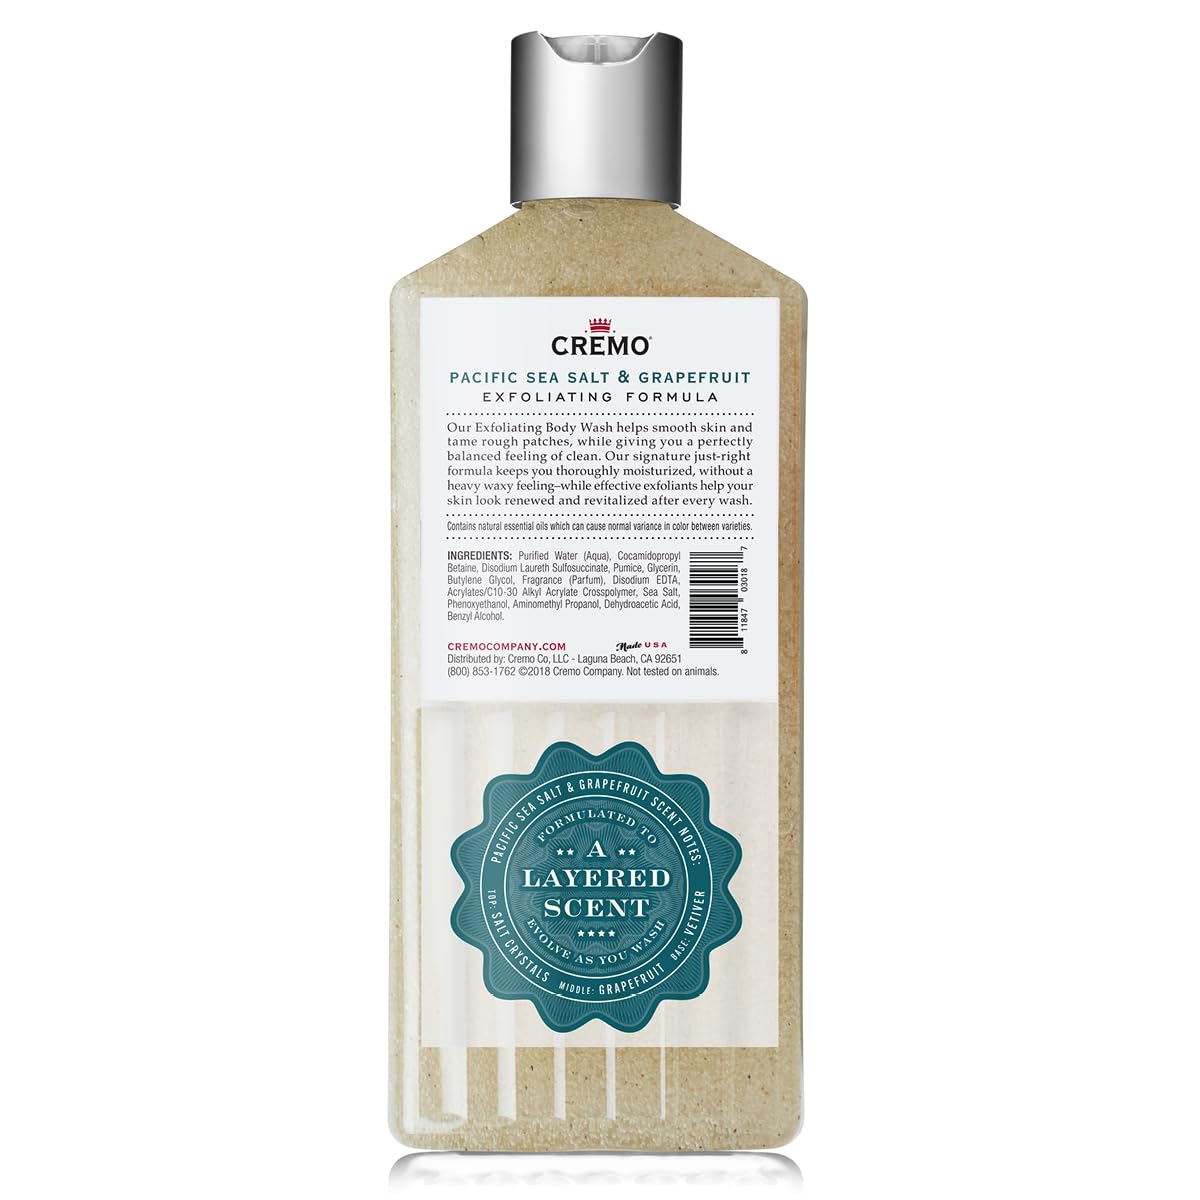 Cremo Exfoliating Pacific Sea Salt & Grapefruit Body Wash, A Refreshing Scent with Notes of Fresh Mint, Citron, Cedar and Moss, 16 Fl Oz